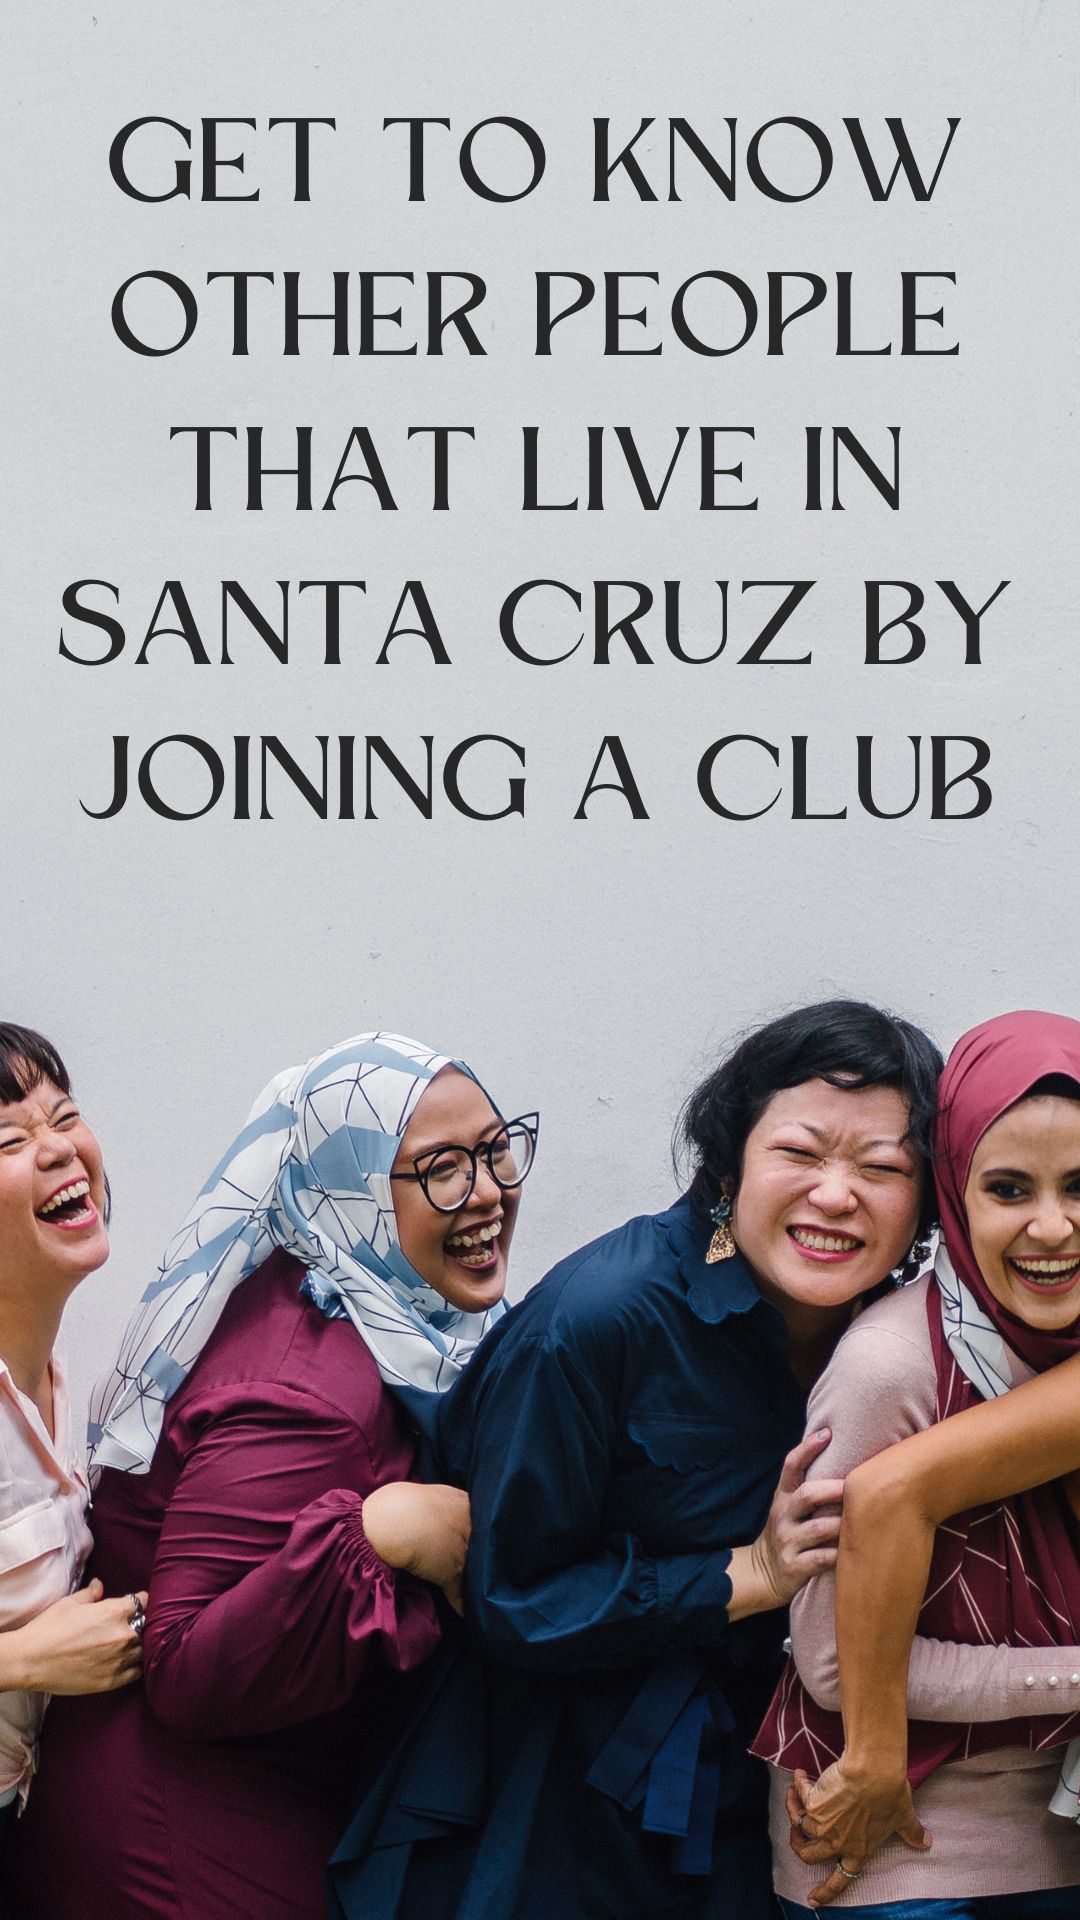 Get to Know Other People that Live in Santa Cruz by Joining a Club